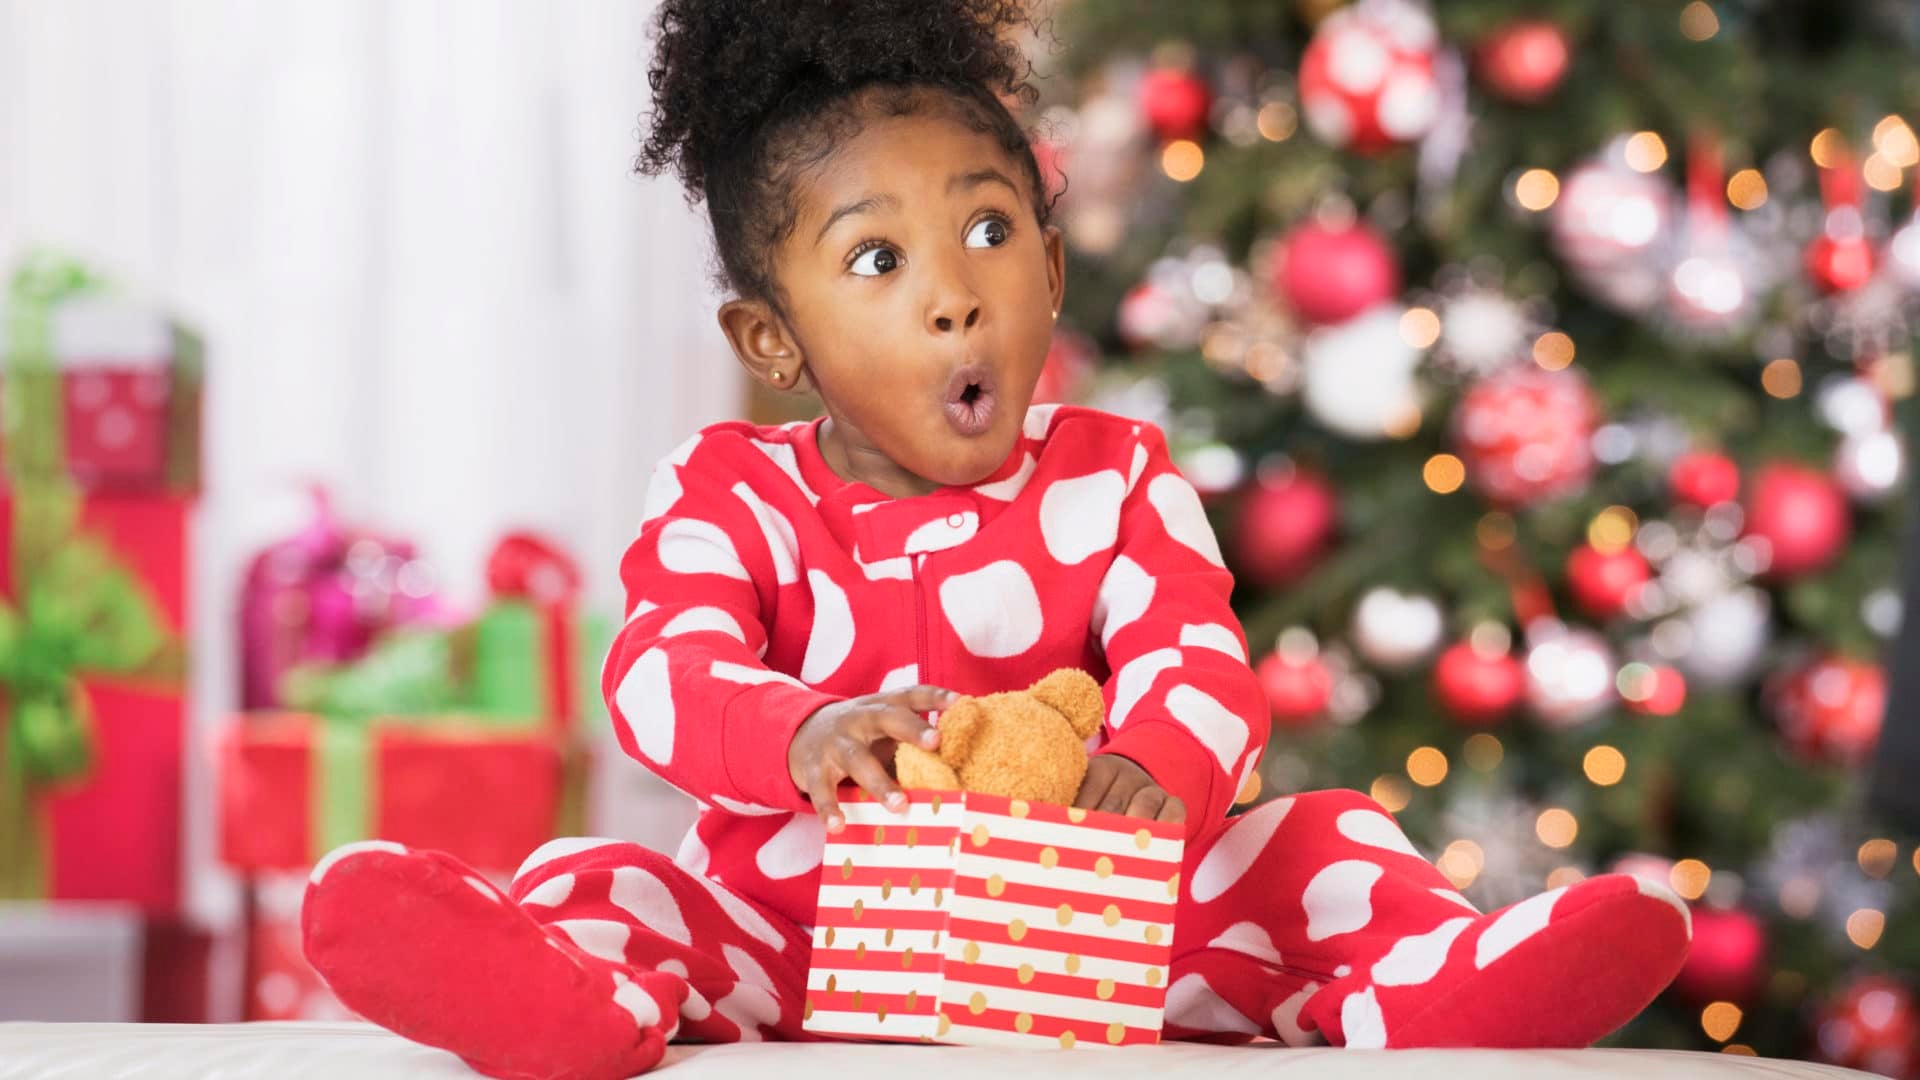 12 Last Minute Christmas Gifts Under 25 Dollars Your Child Will